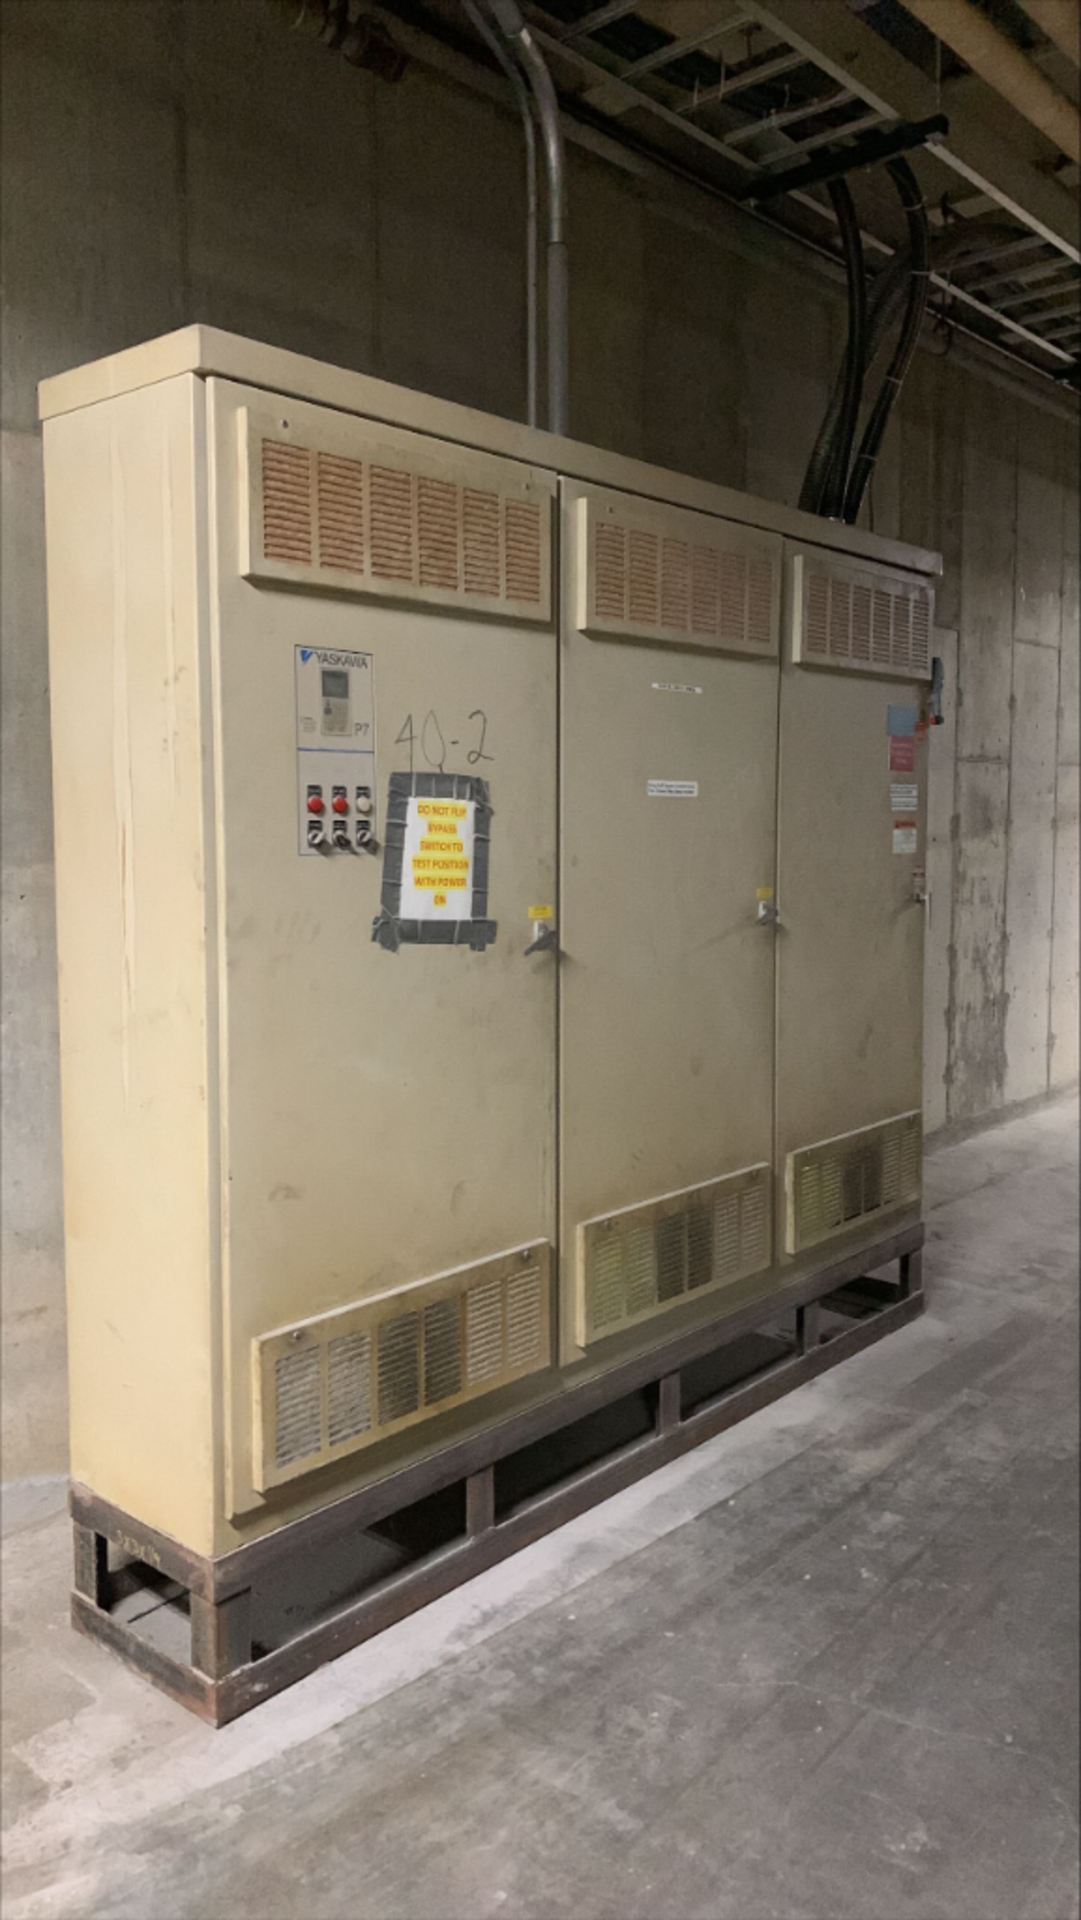 Yaskawa Electrical Cabinet with contents